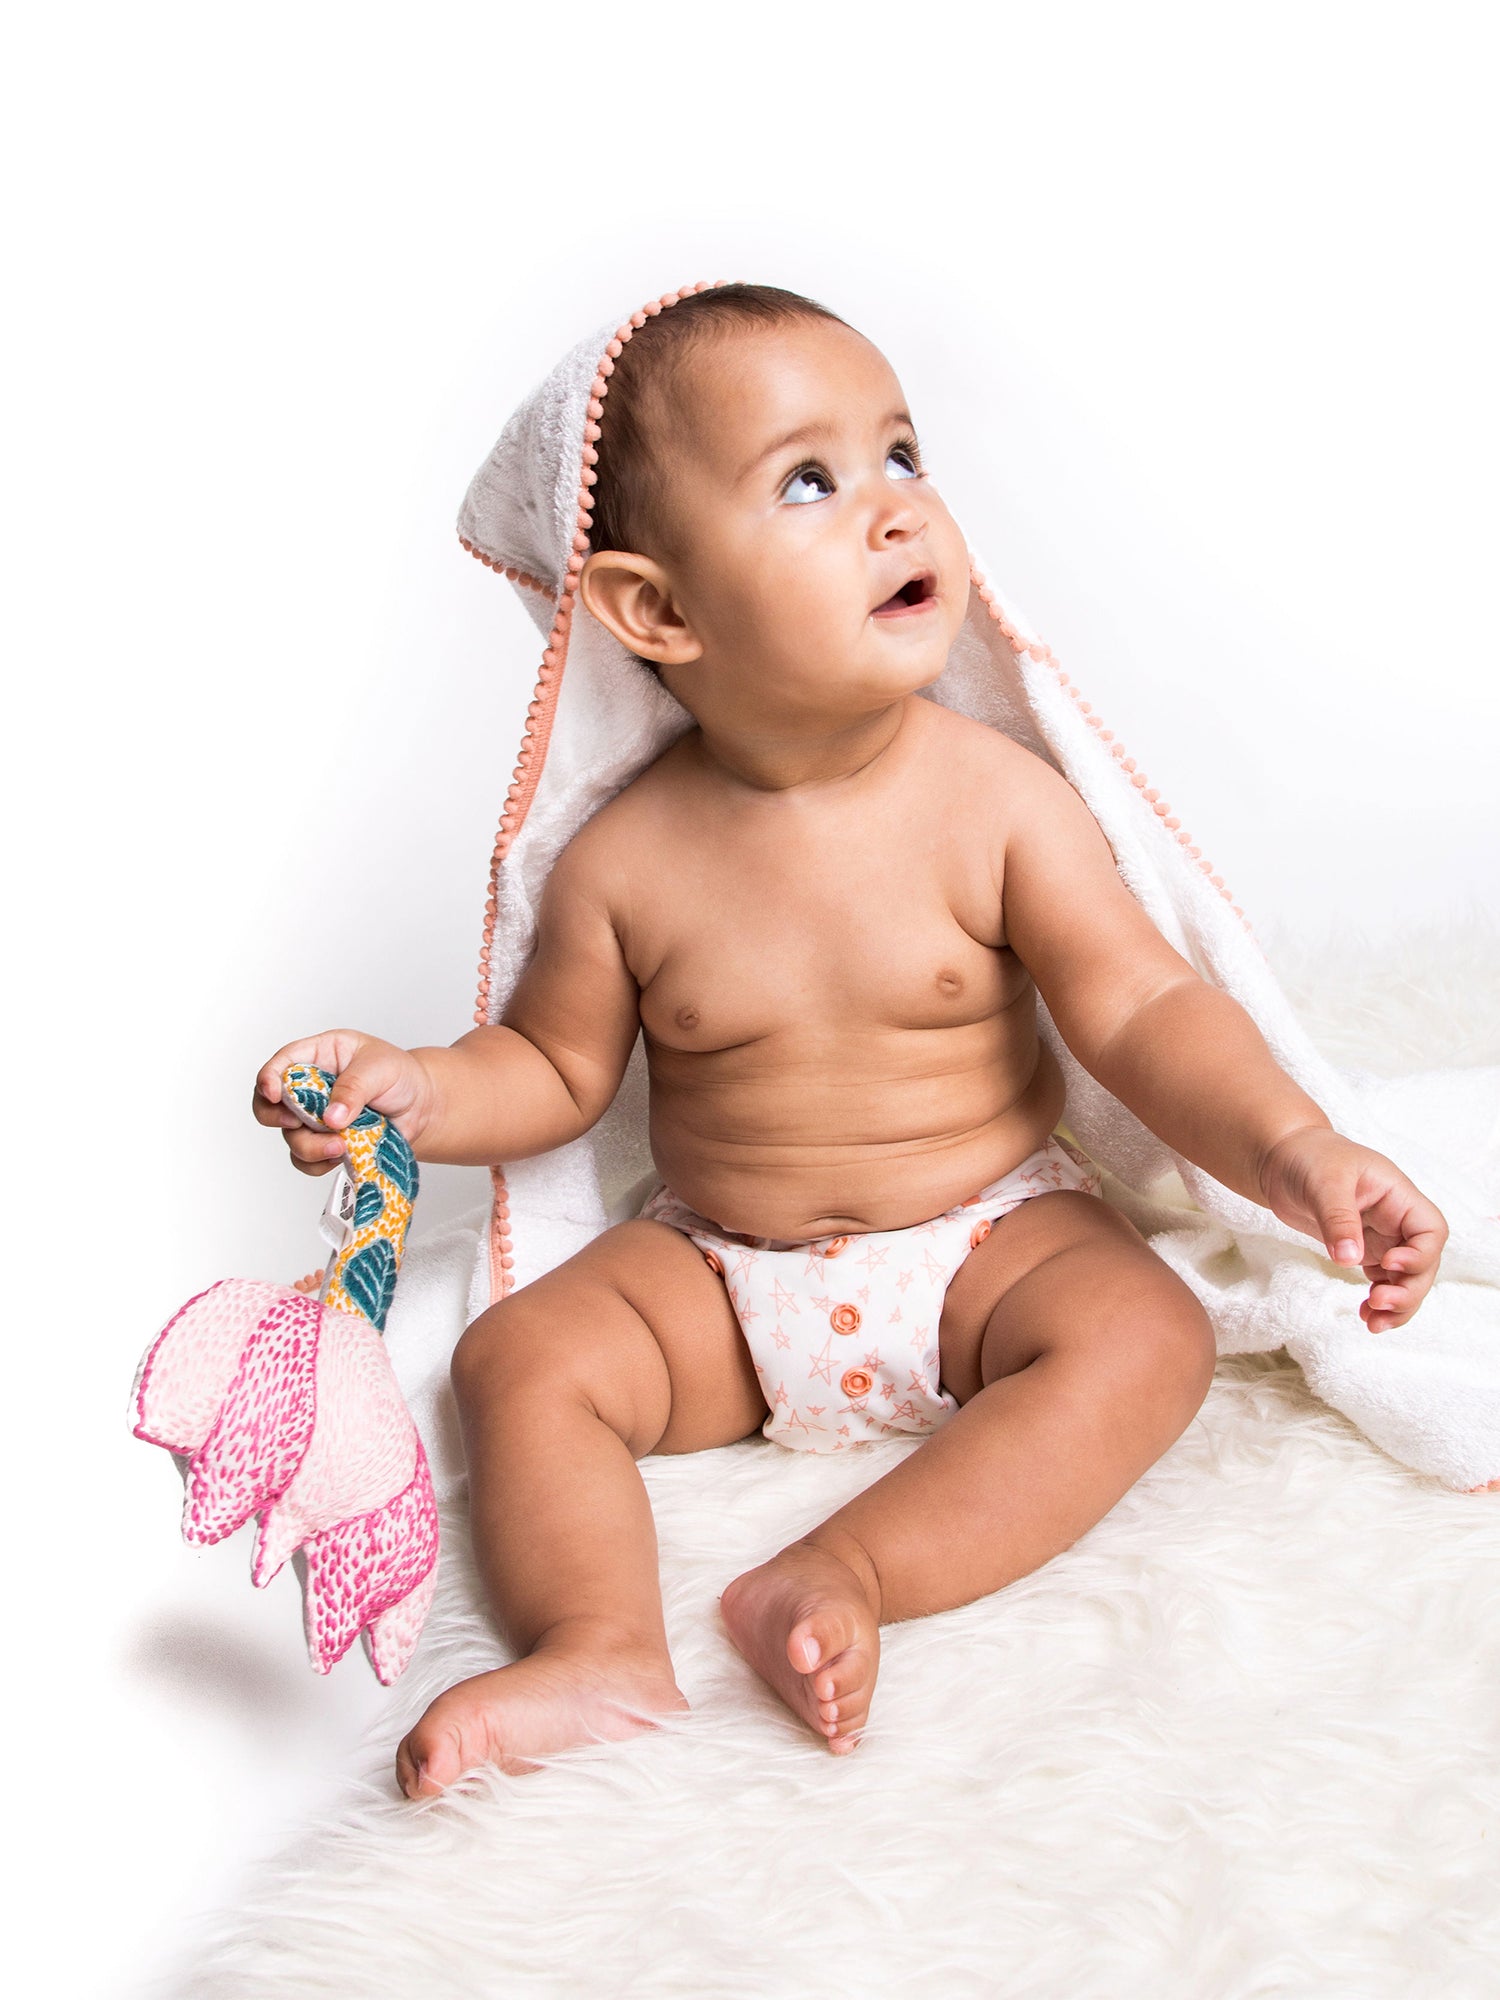 3 Pc Newborn Essential Set - Hooded Towel, Swaddle + Toy Rattle